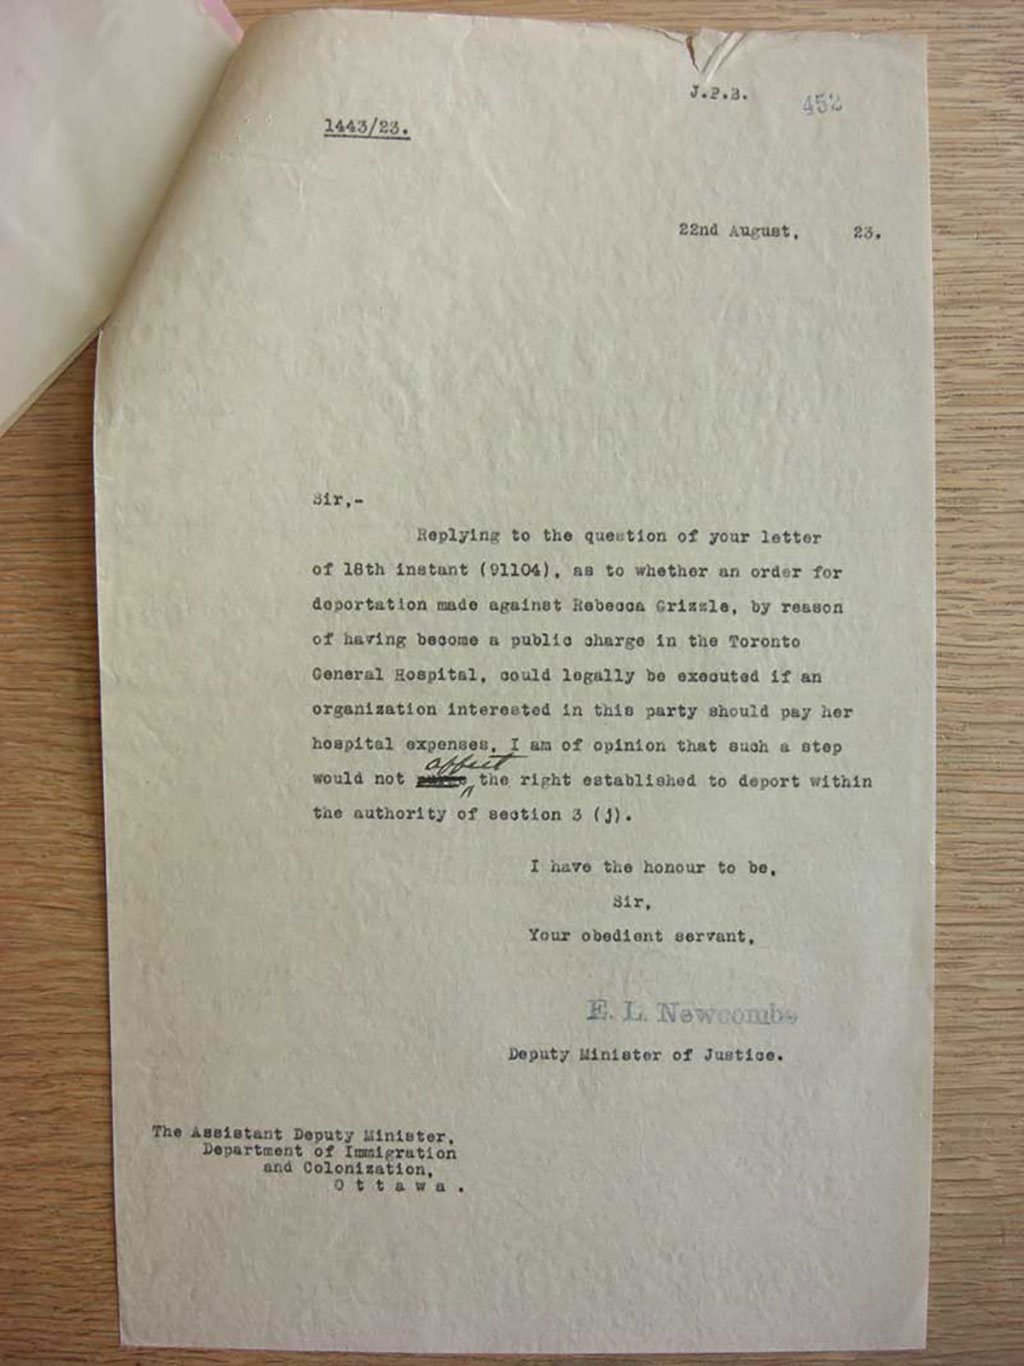 Photo of a typed letter dated 22 August 1923.